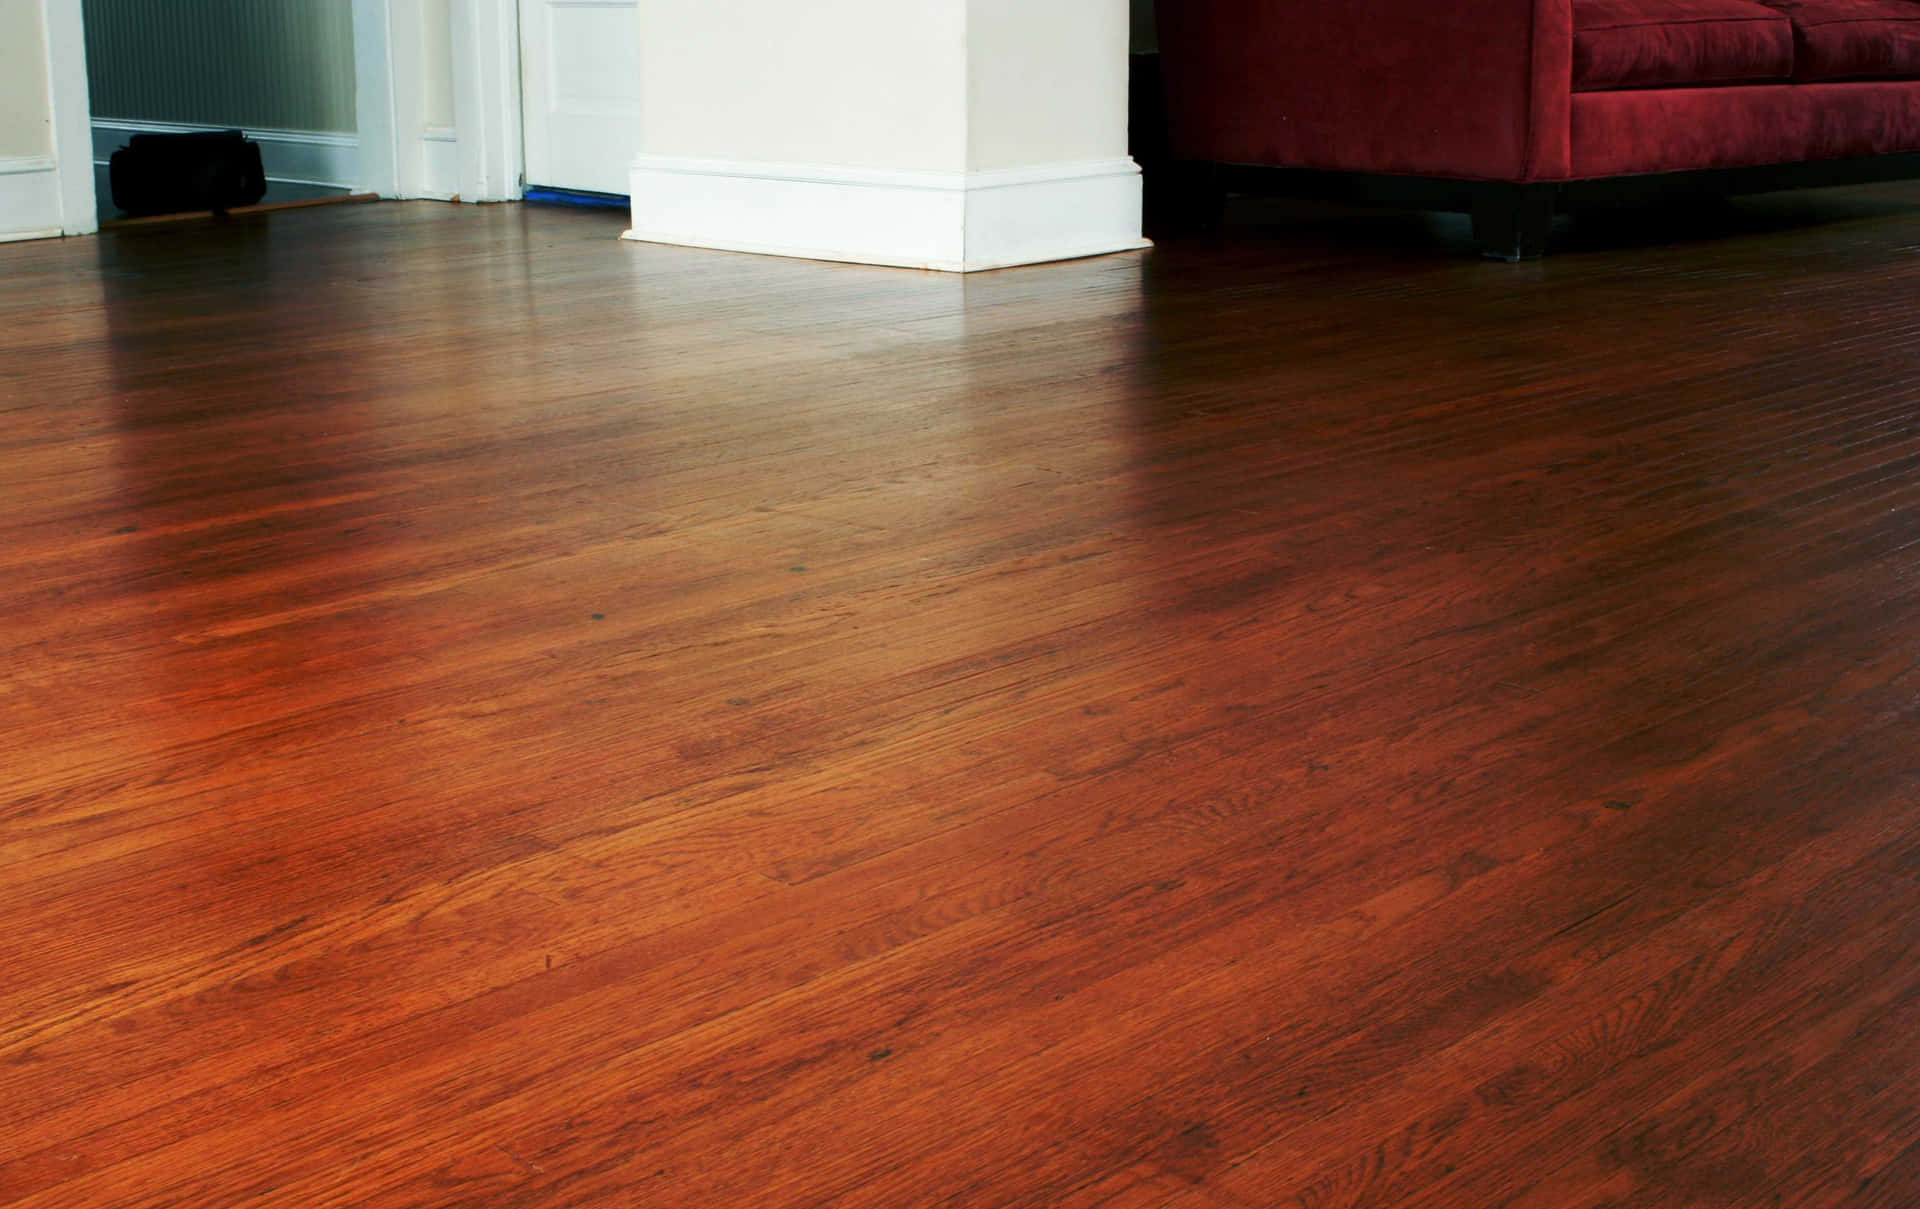 Hardwood Flooring Adding Warmth&Character To Any Home